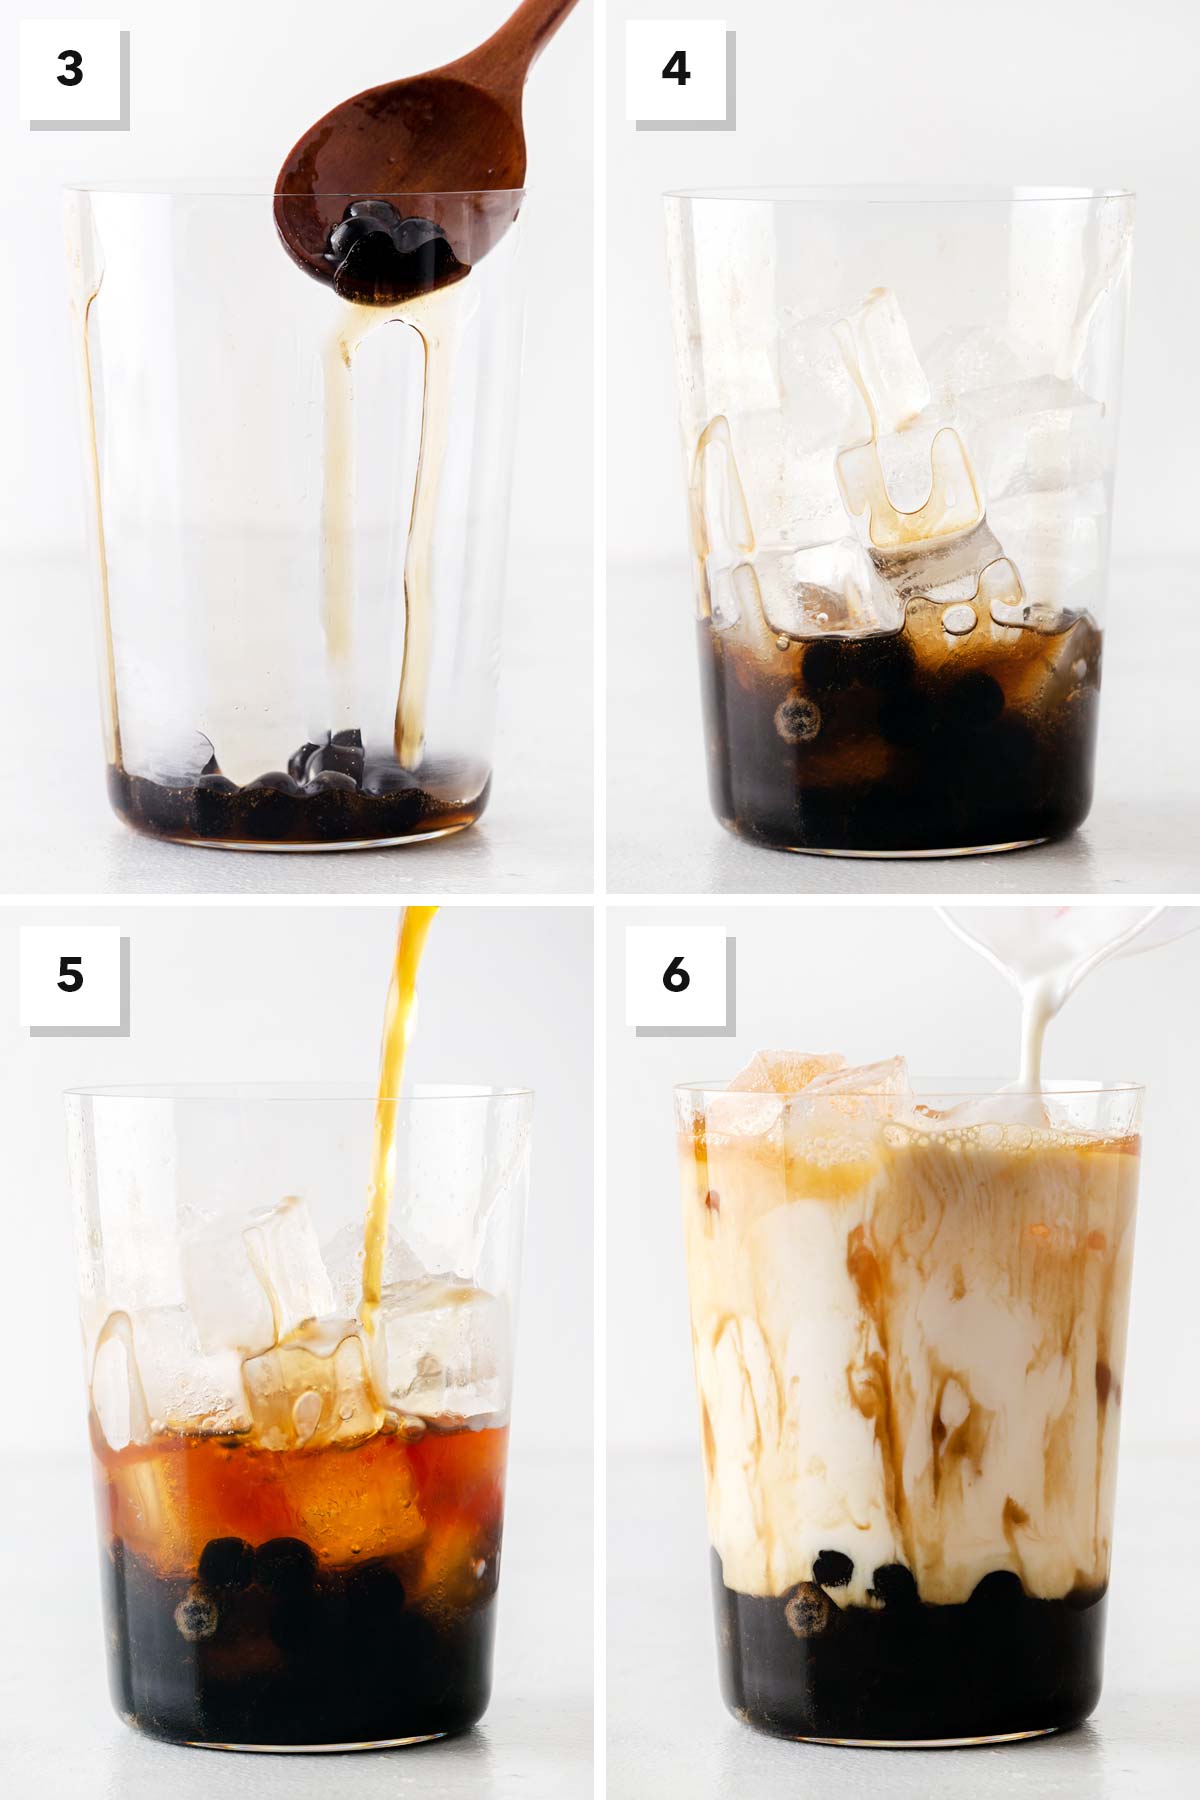 Brown Sugar Bubble Tea, steps 3 to 6 of the instructions.